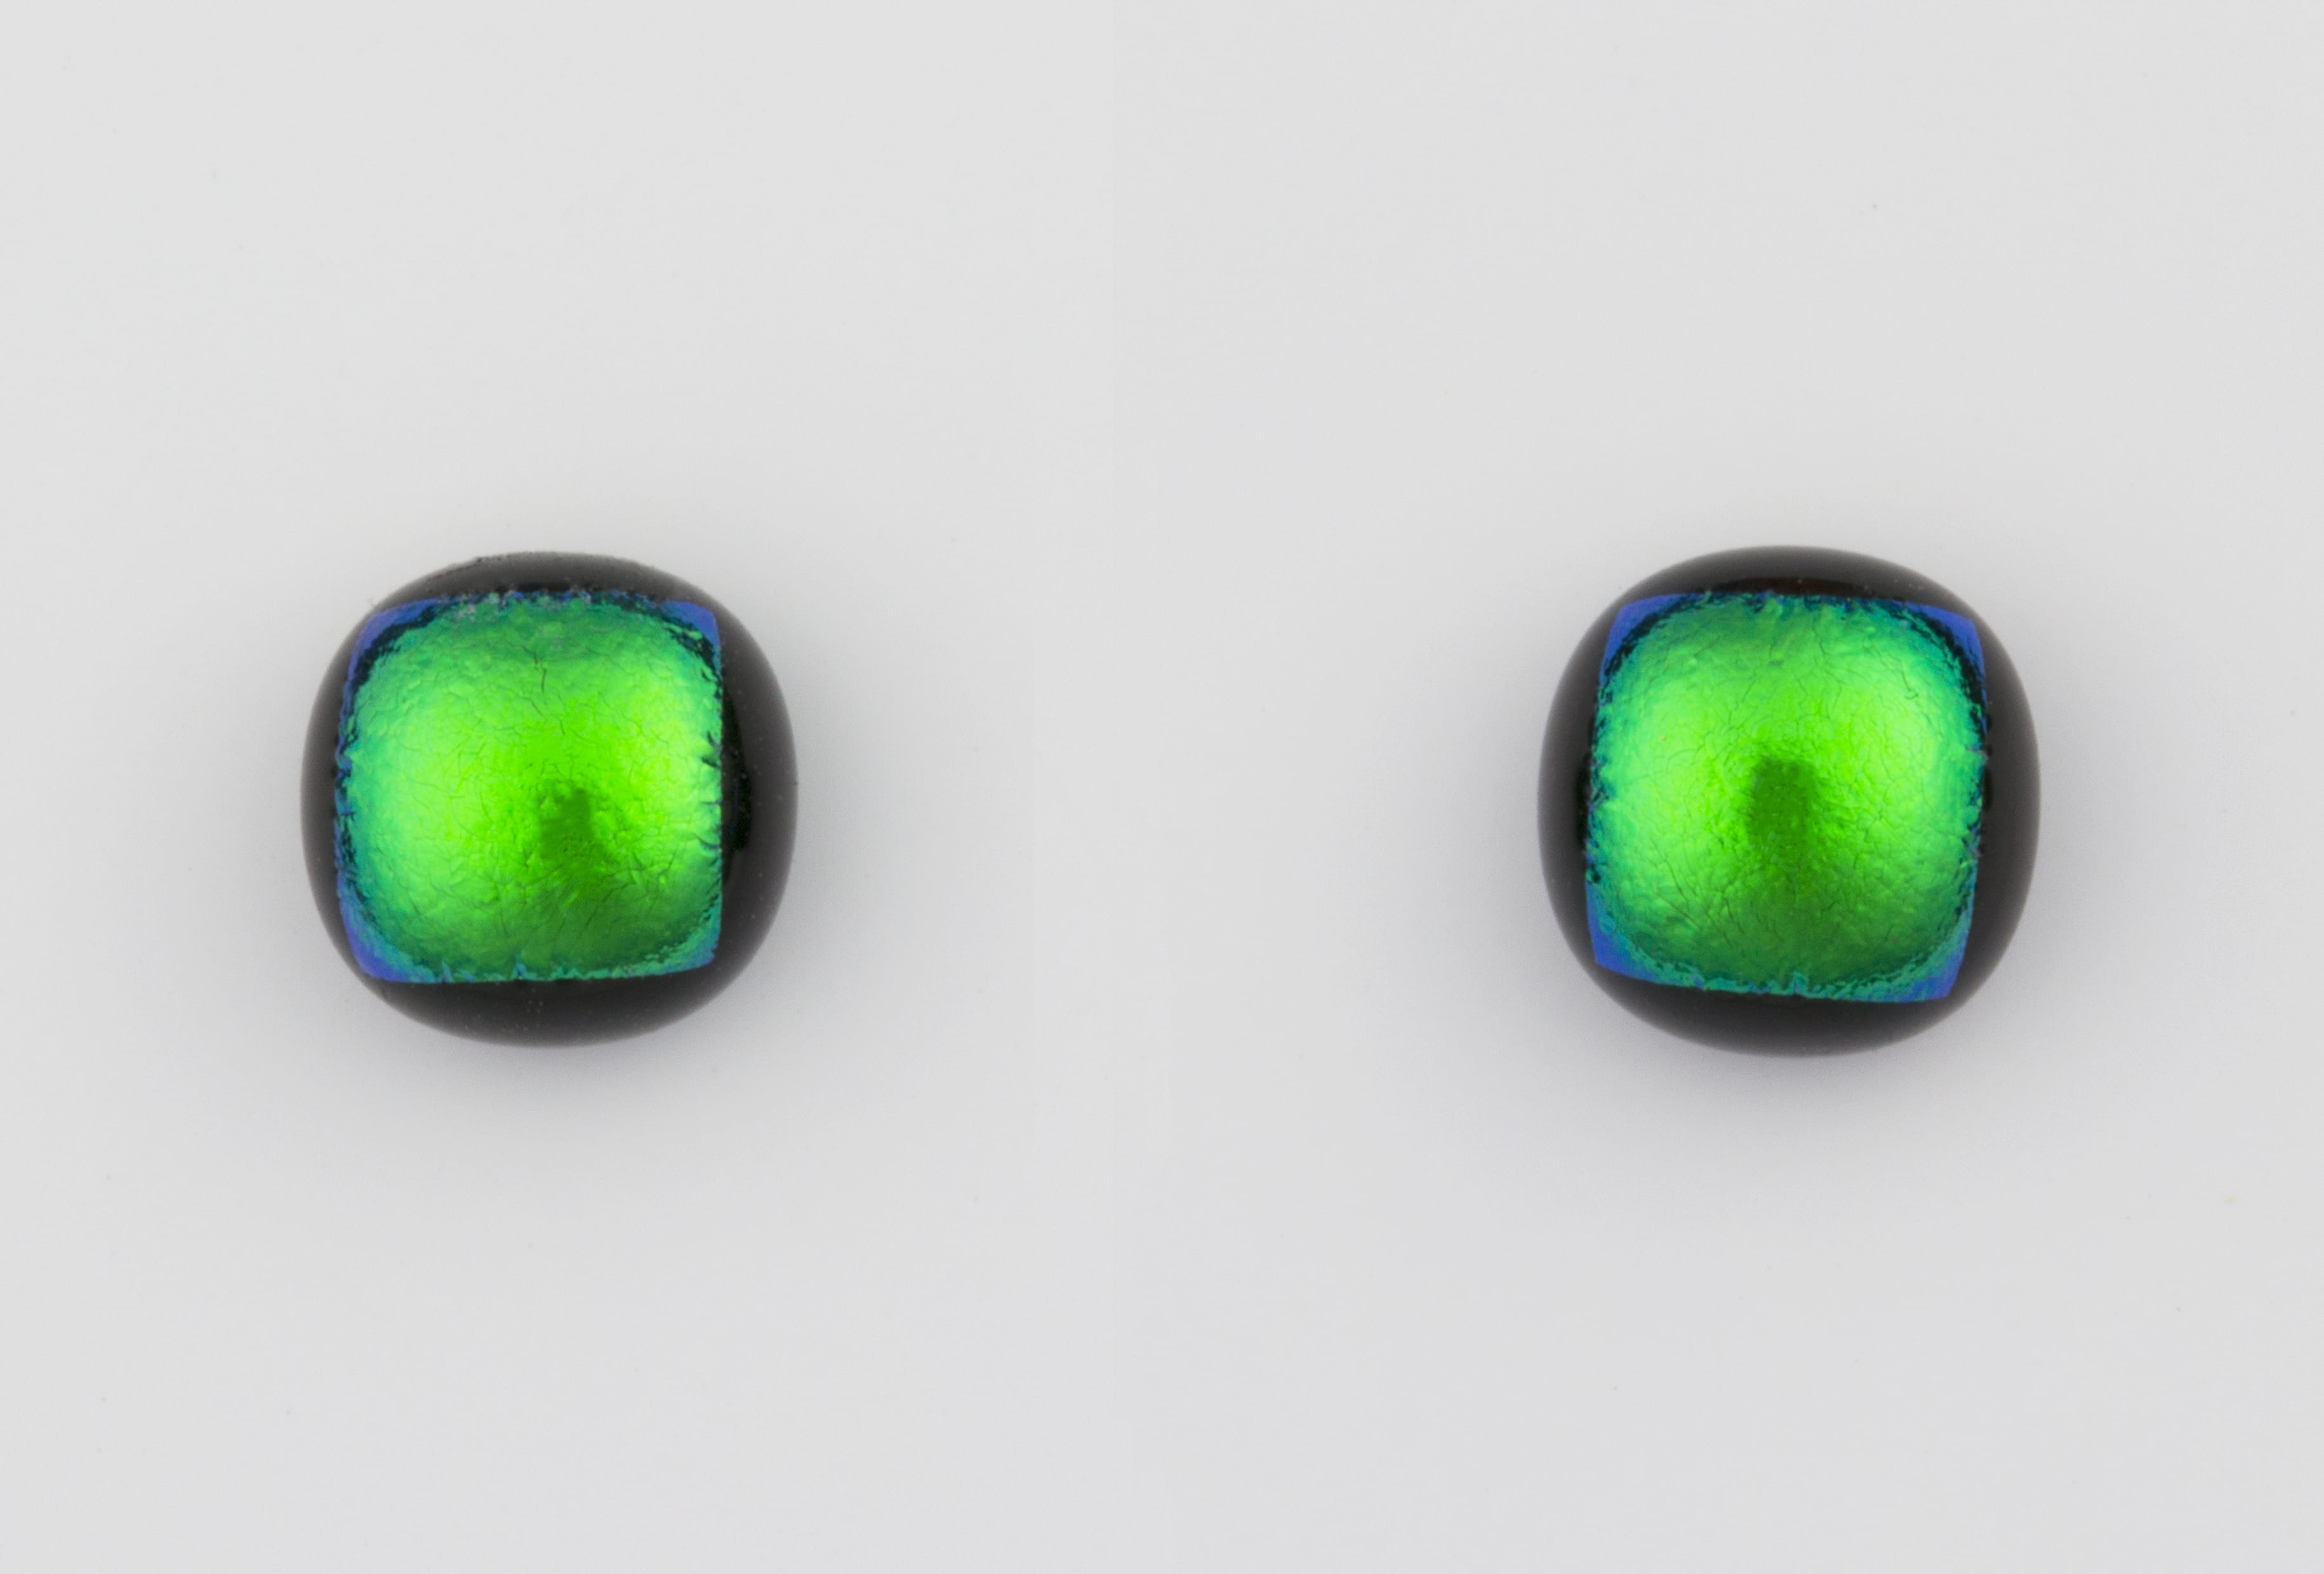 Dichroic glass jewellery uk, handmade stud earrings with bright green dichroic glass, round, sterling glass 7-9mm, silver posts.